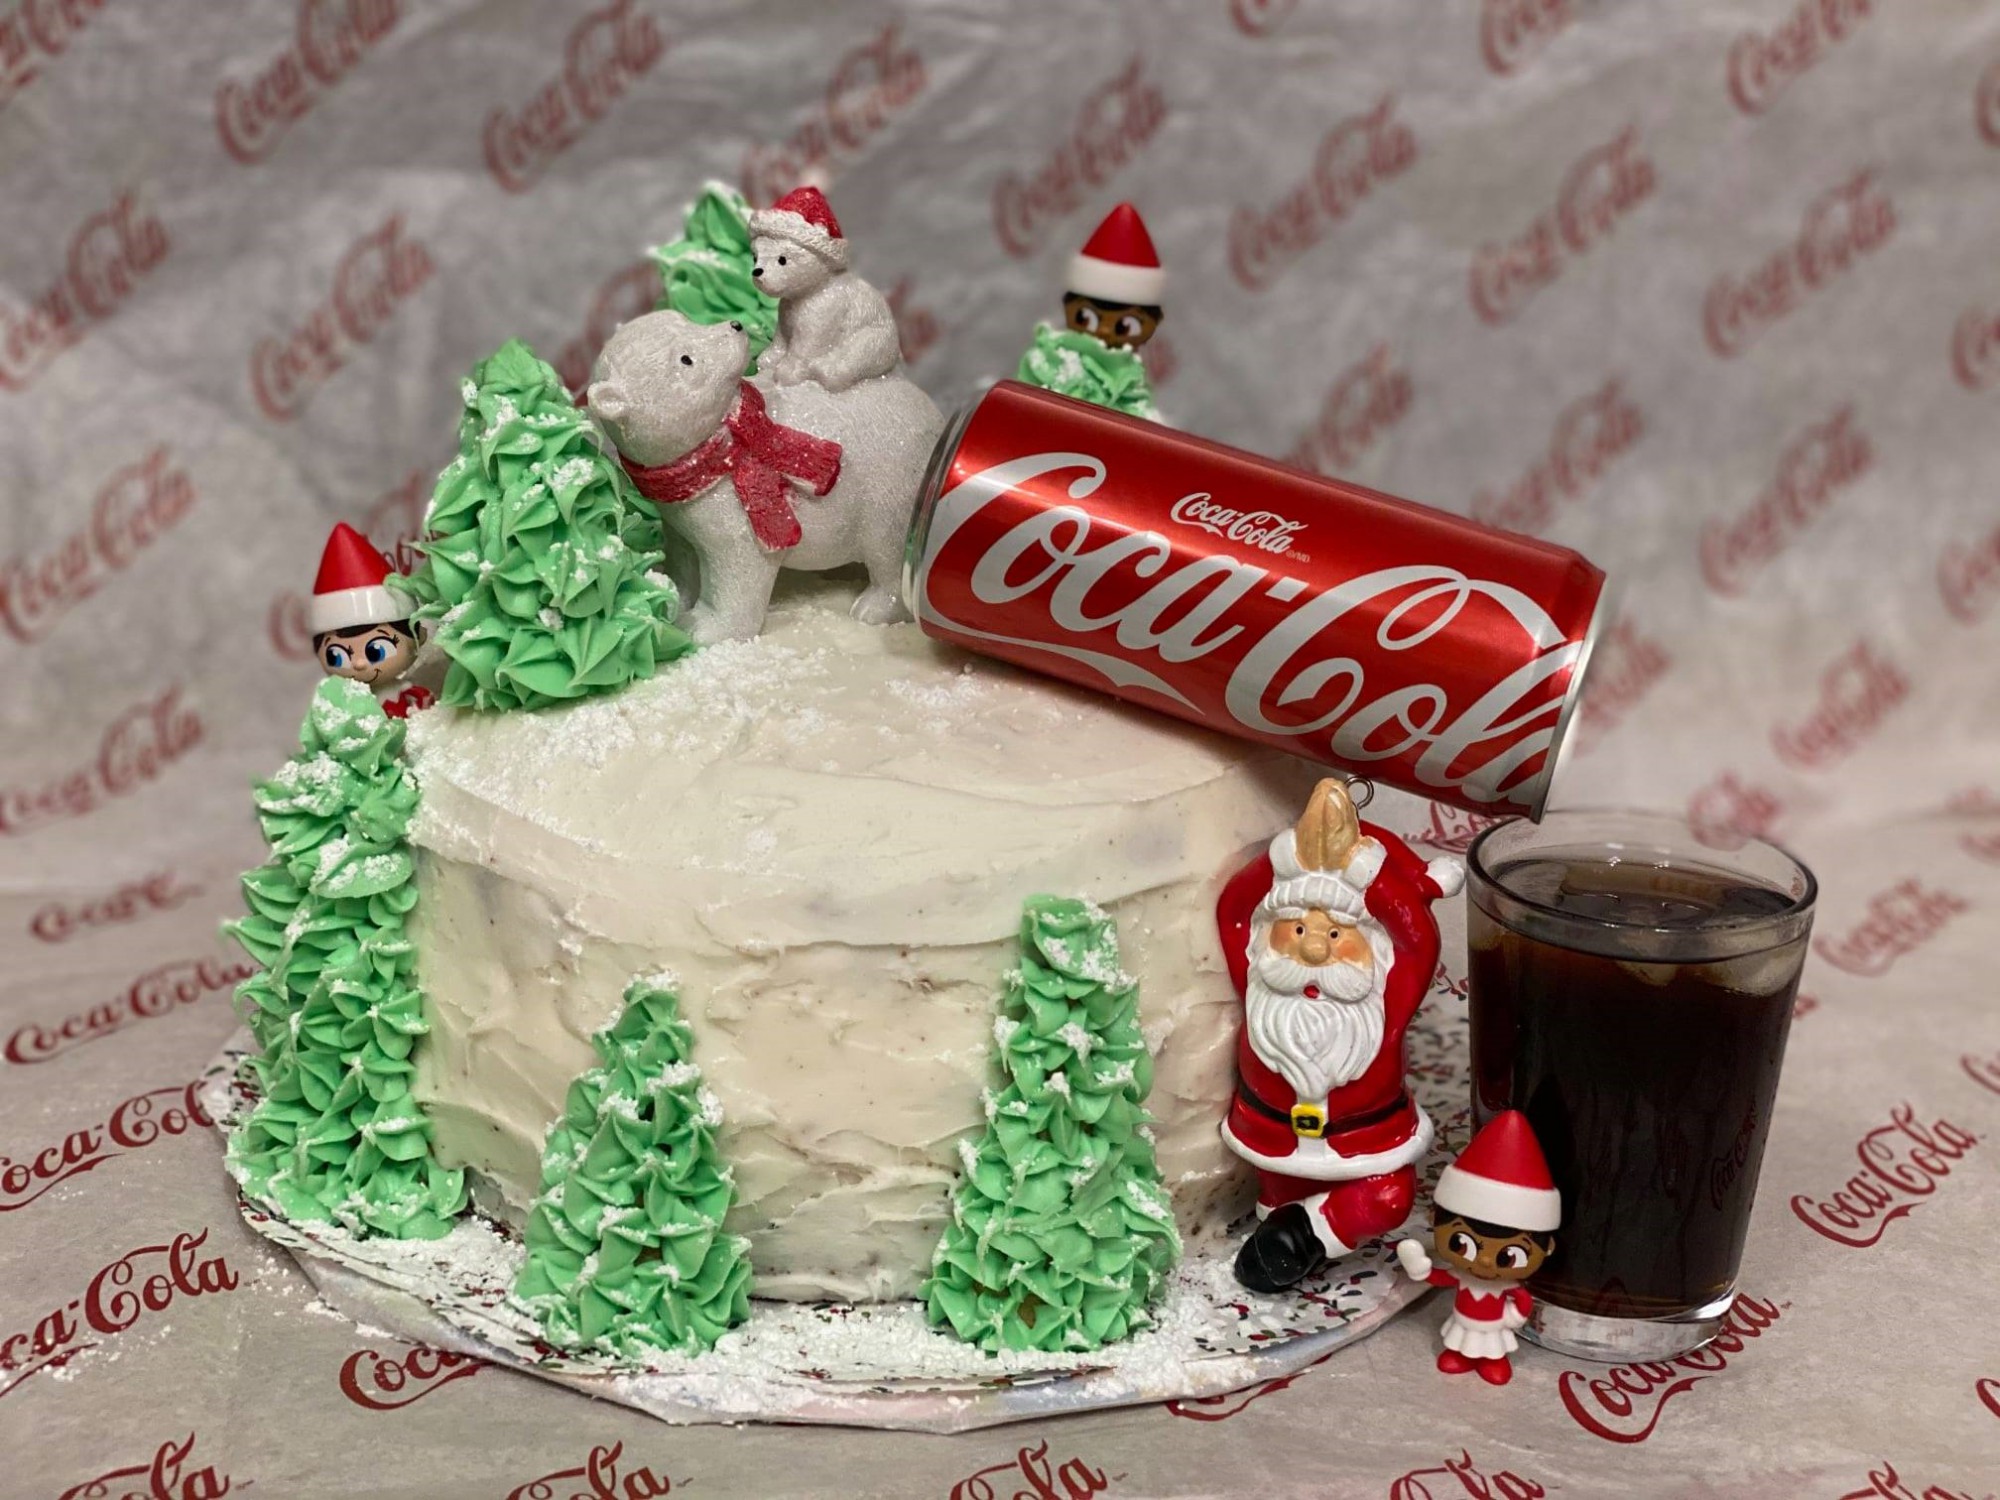 a cake decorated with a Santa, trees and a can of Coca-Cola